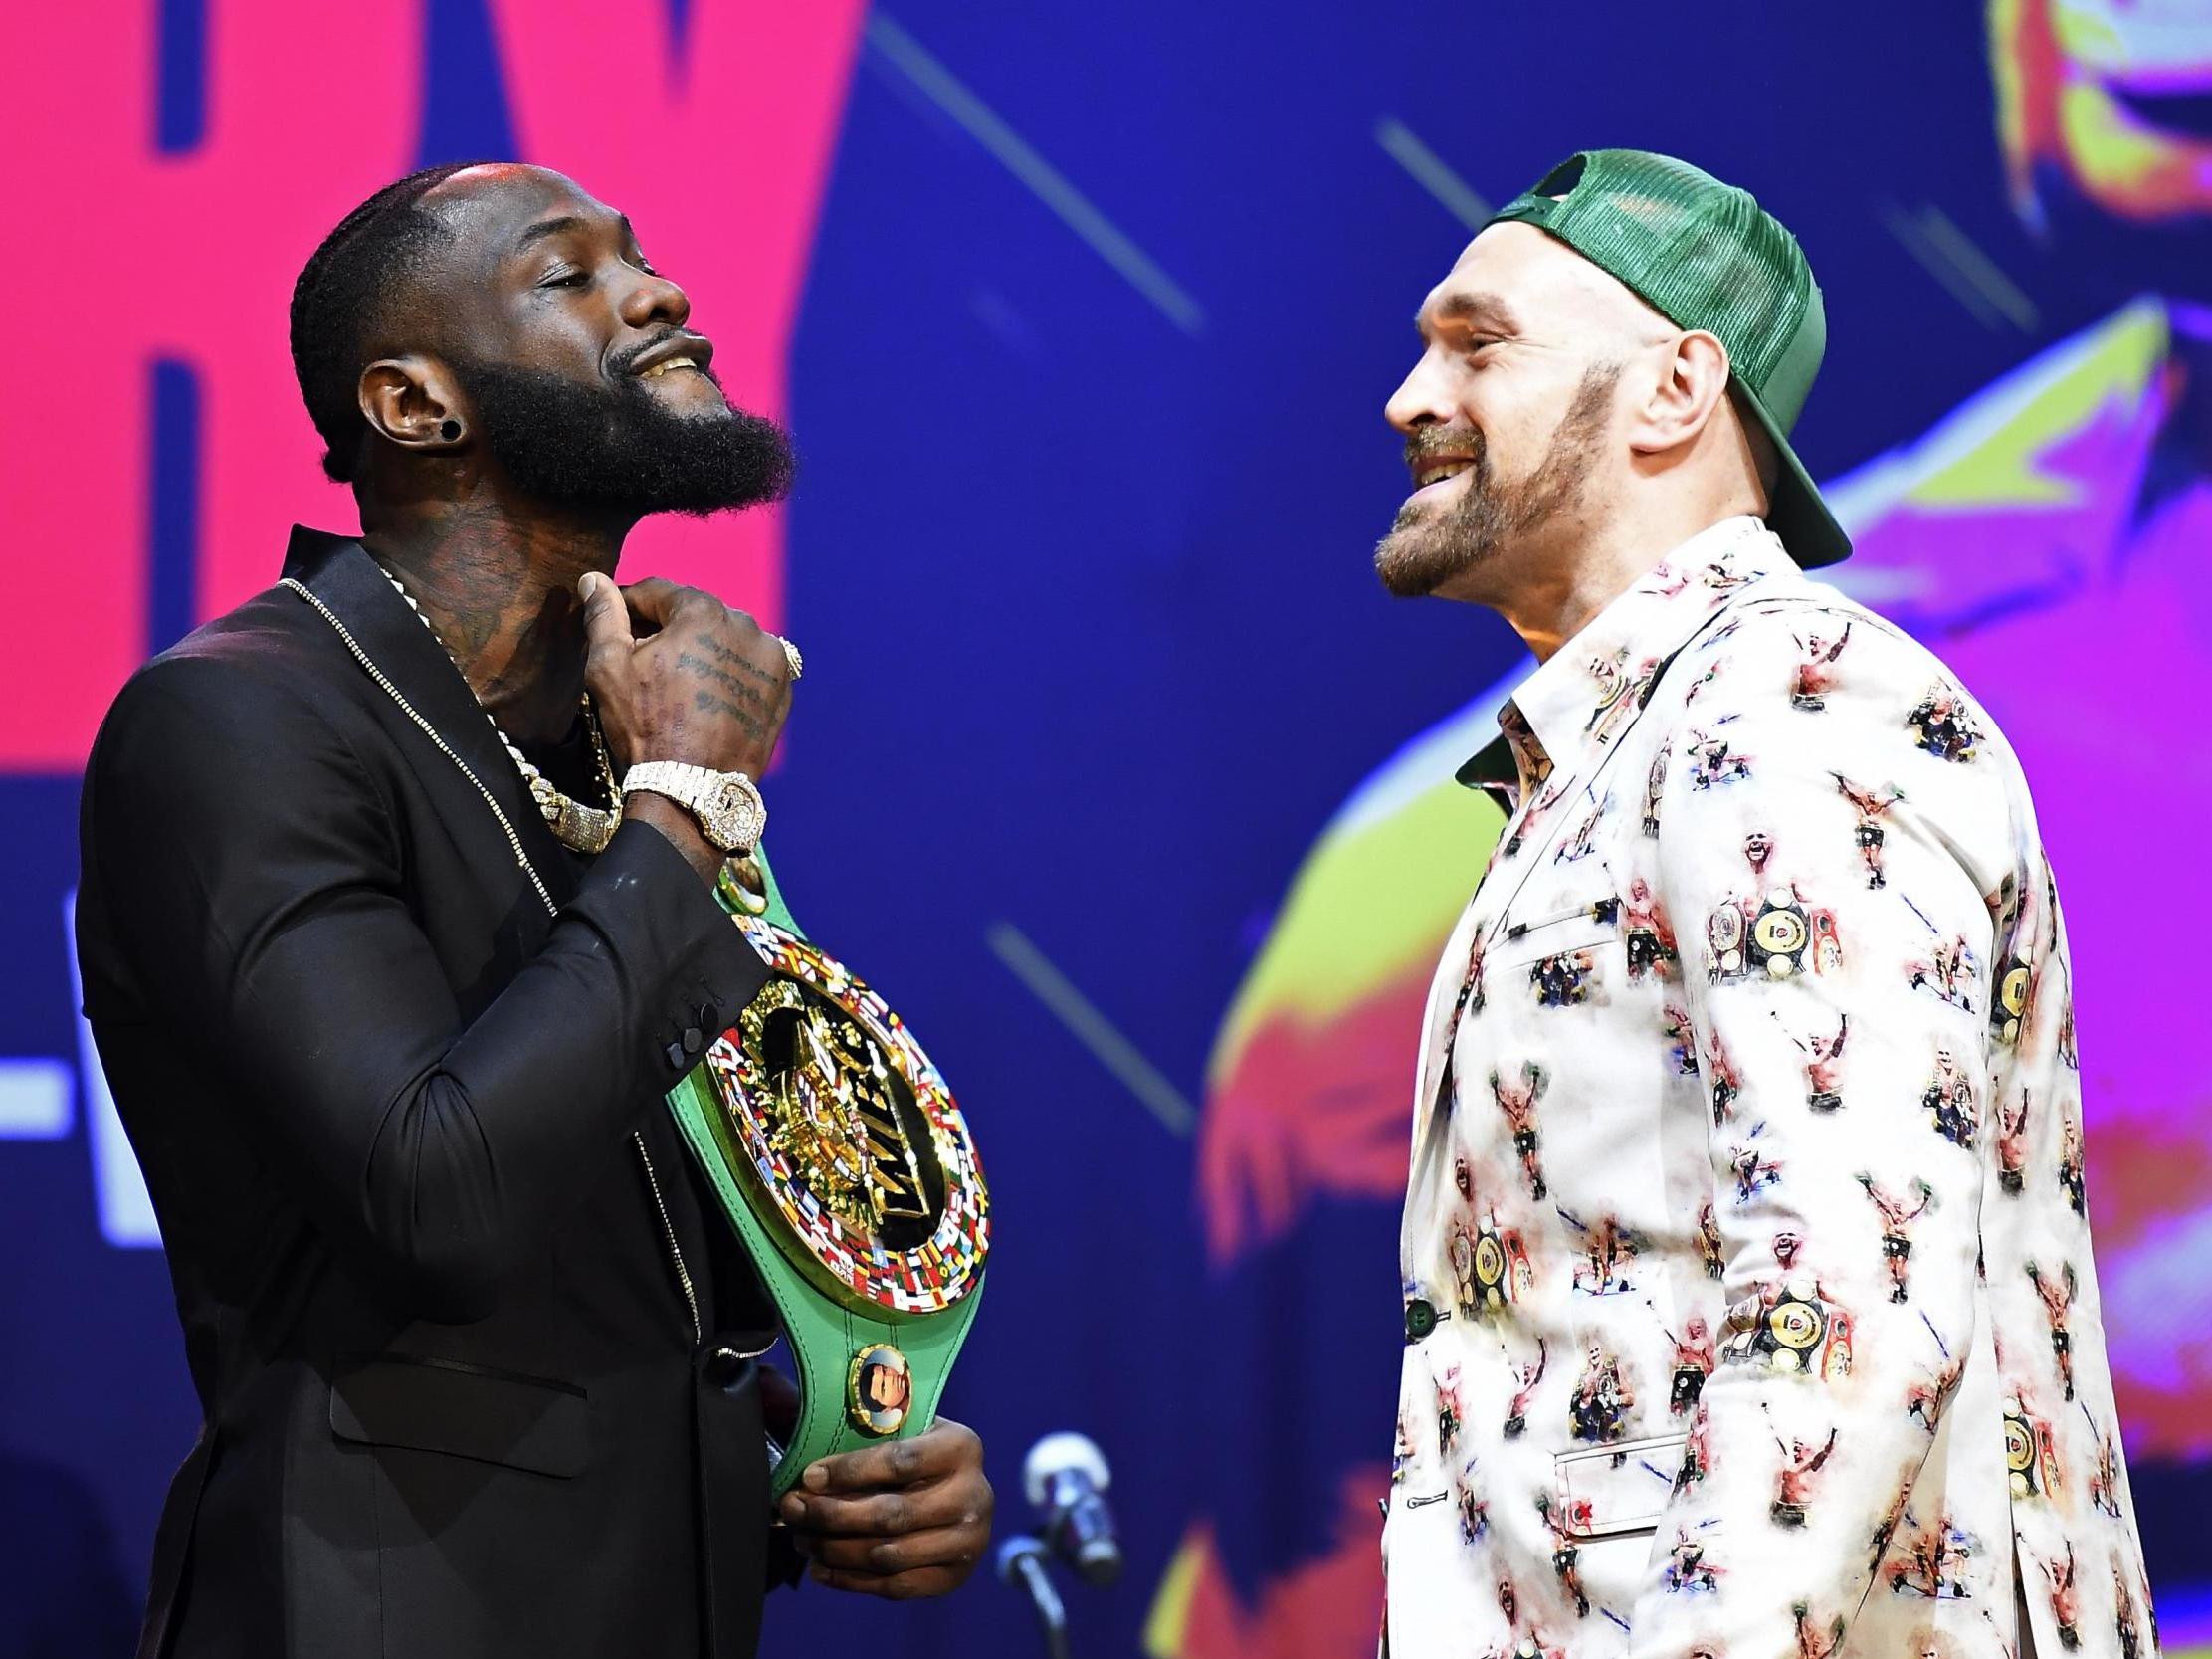 Deontay Wilder (left) and Tyson Fury fought to a controversial draw in December 2018